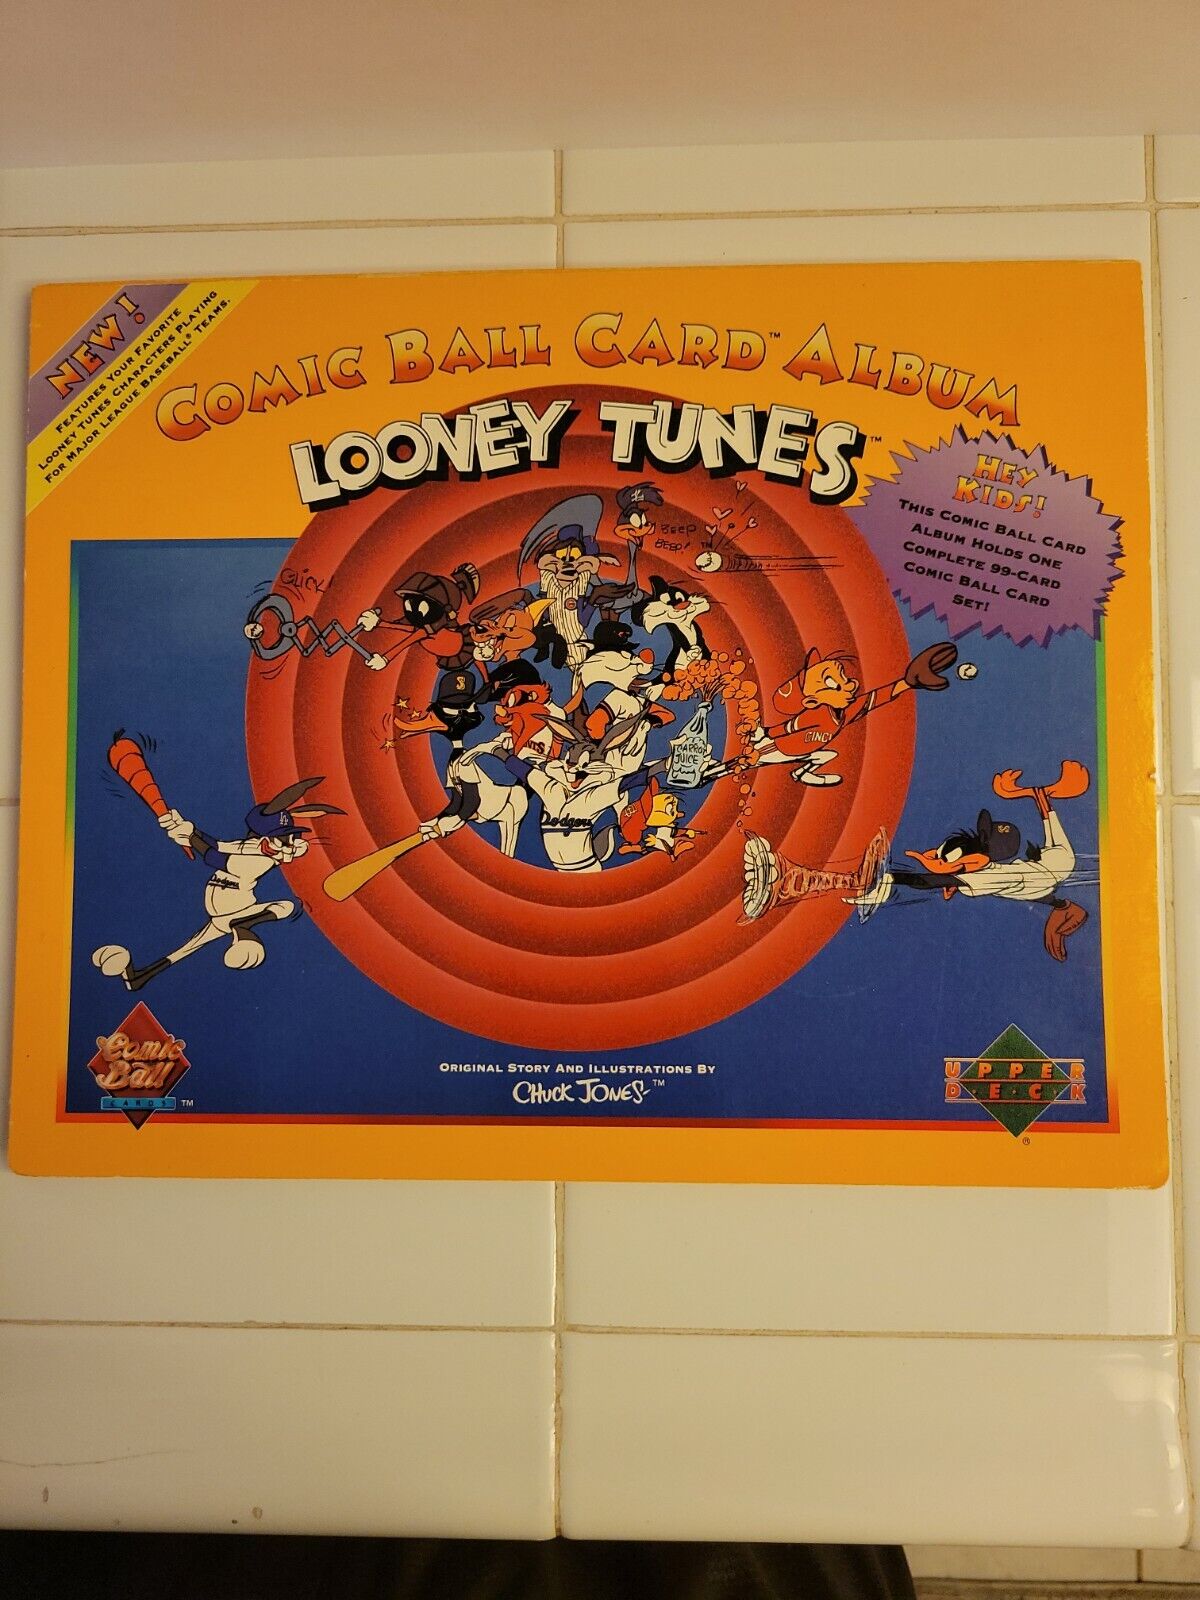 1991 Upper Deck Looney Tunes Trading Cards. Series # 1